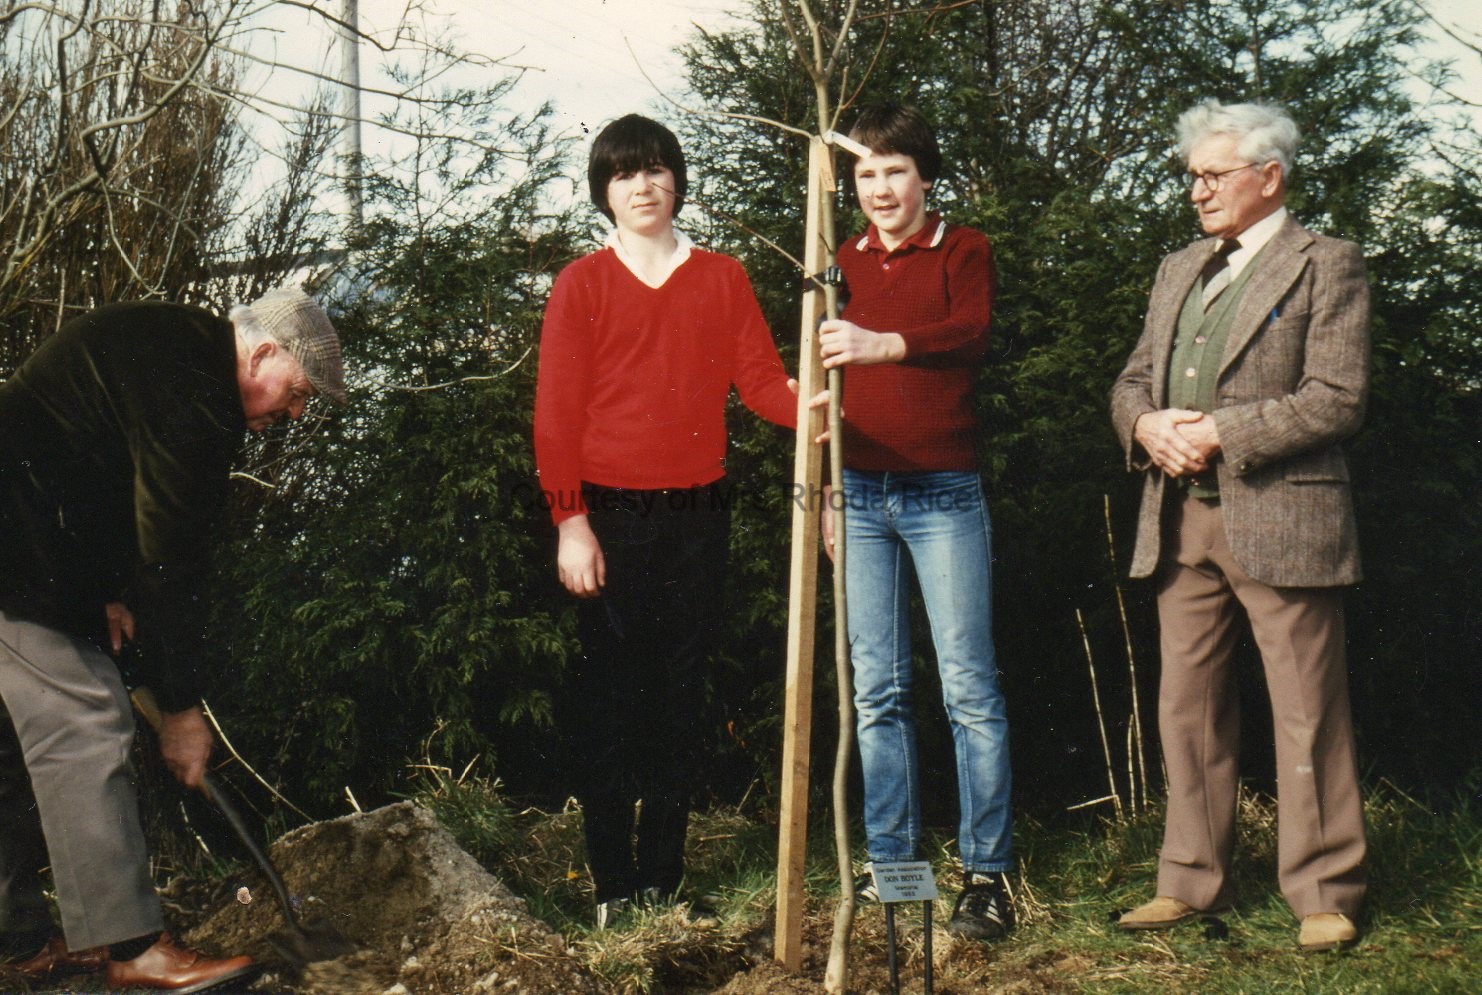 Tree Planting in the Park - Circa 1984 Roy Inch- Kevin Tonkin - Andrew Rice - Ashley Waters